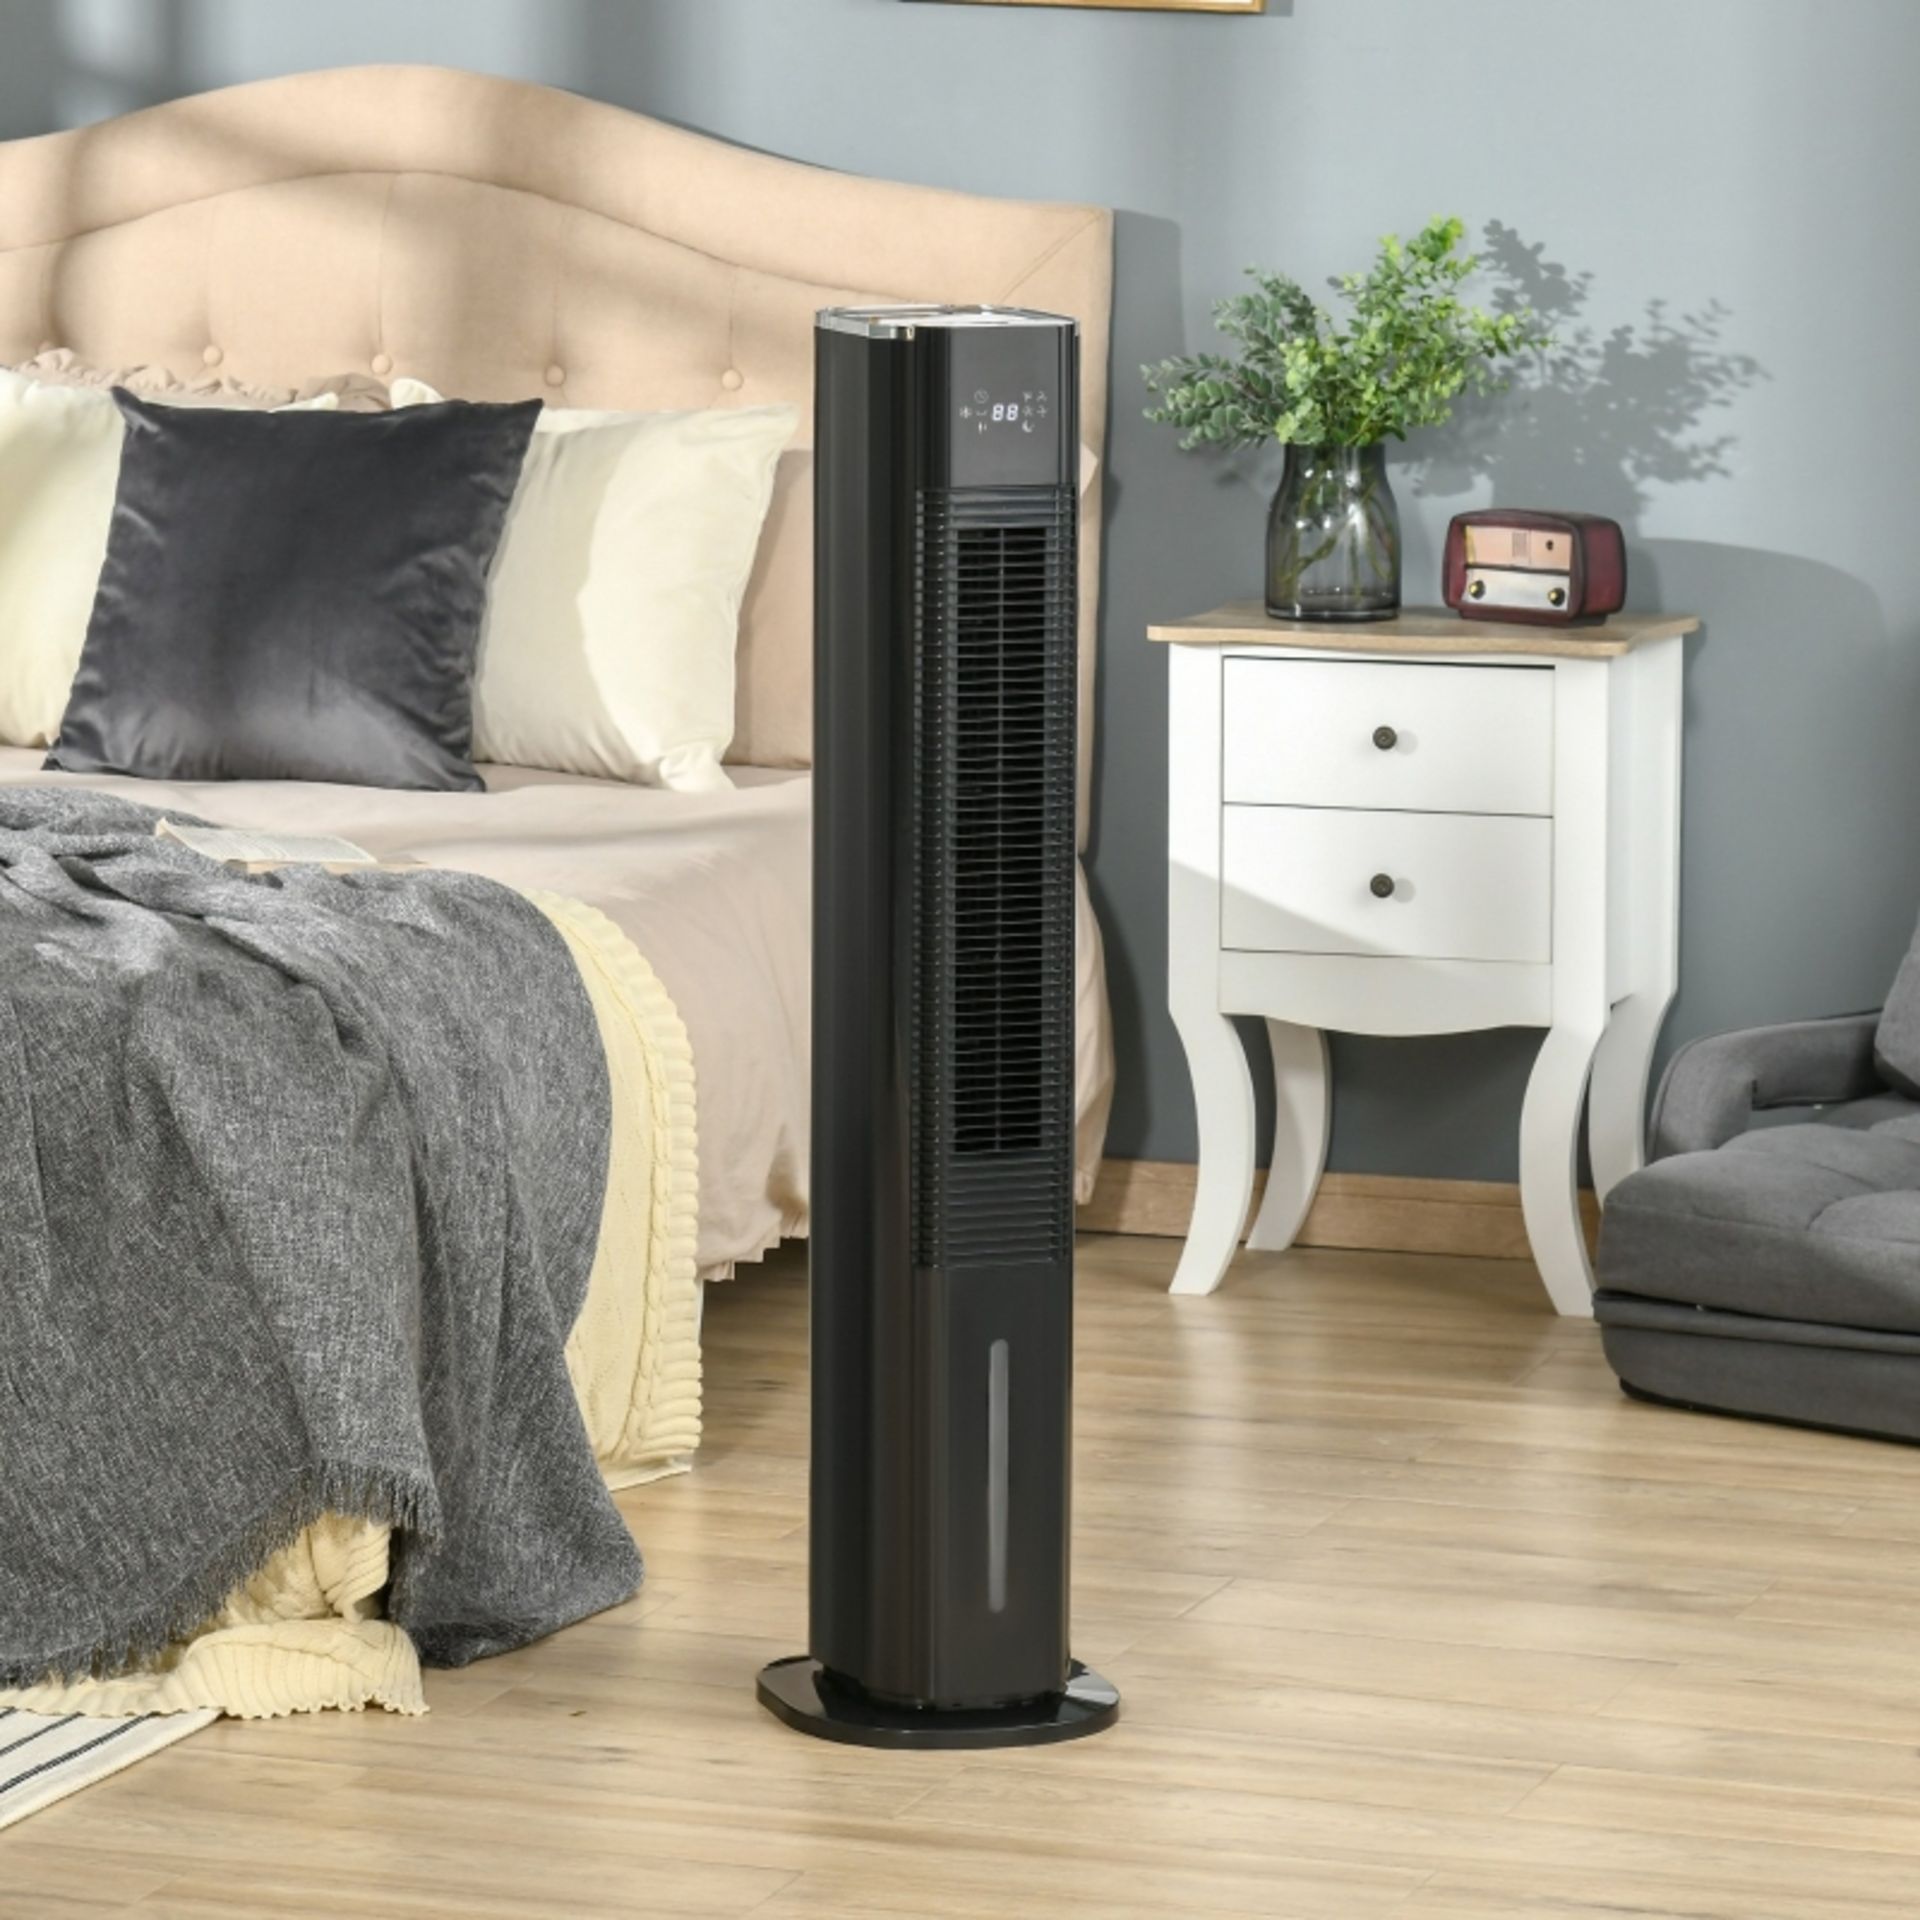 RPP £149.99 -HOMCOM 42" Portable Cooling Fan, Water Conditioner Unit with 3 Modes, 3 Speed, Remote